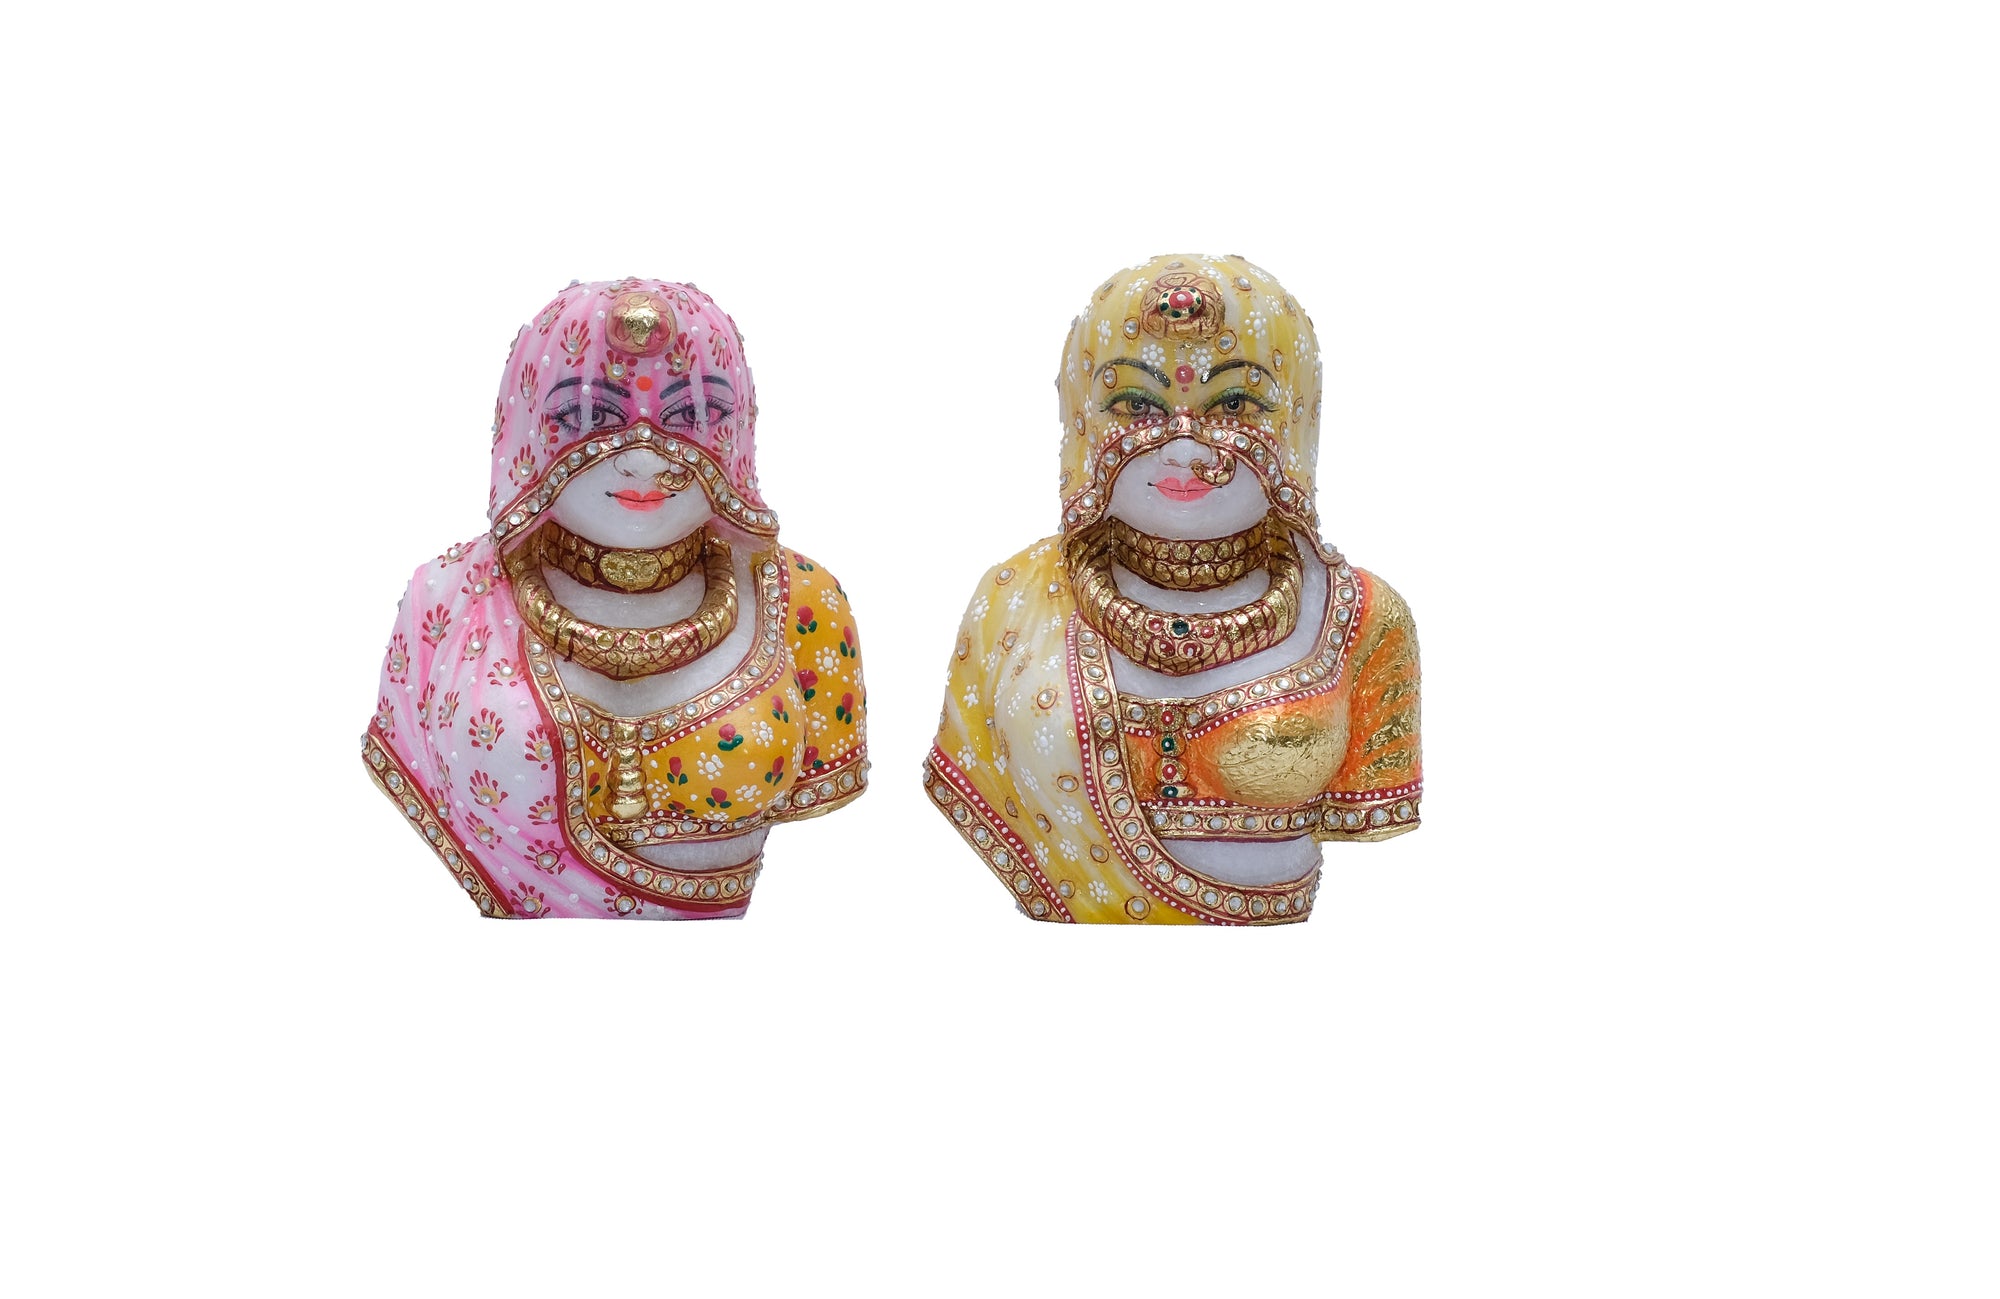 Marble Banni Thanni in Pink and Yellow